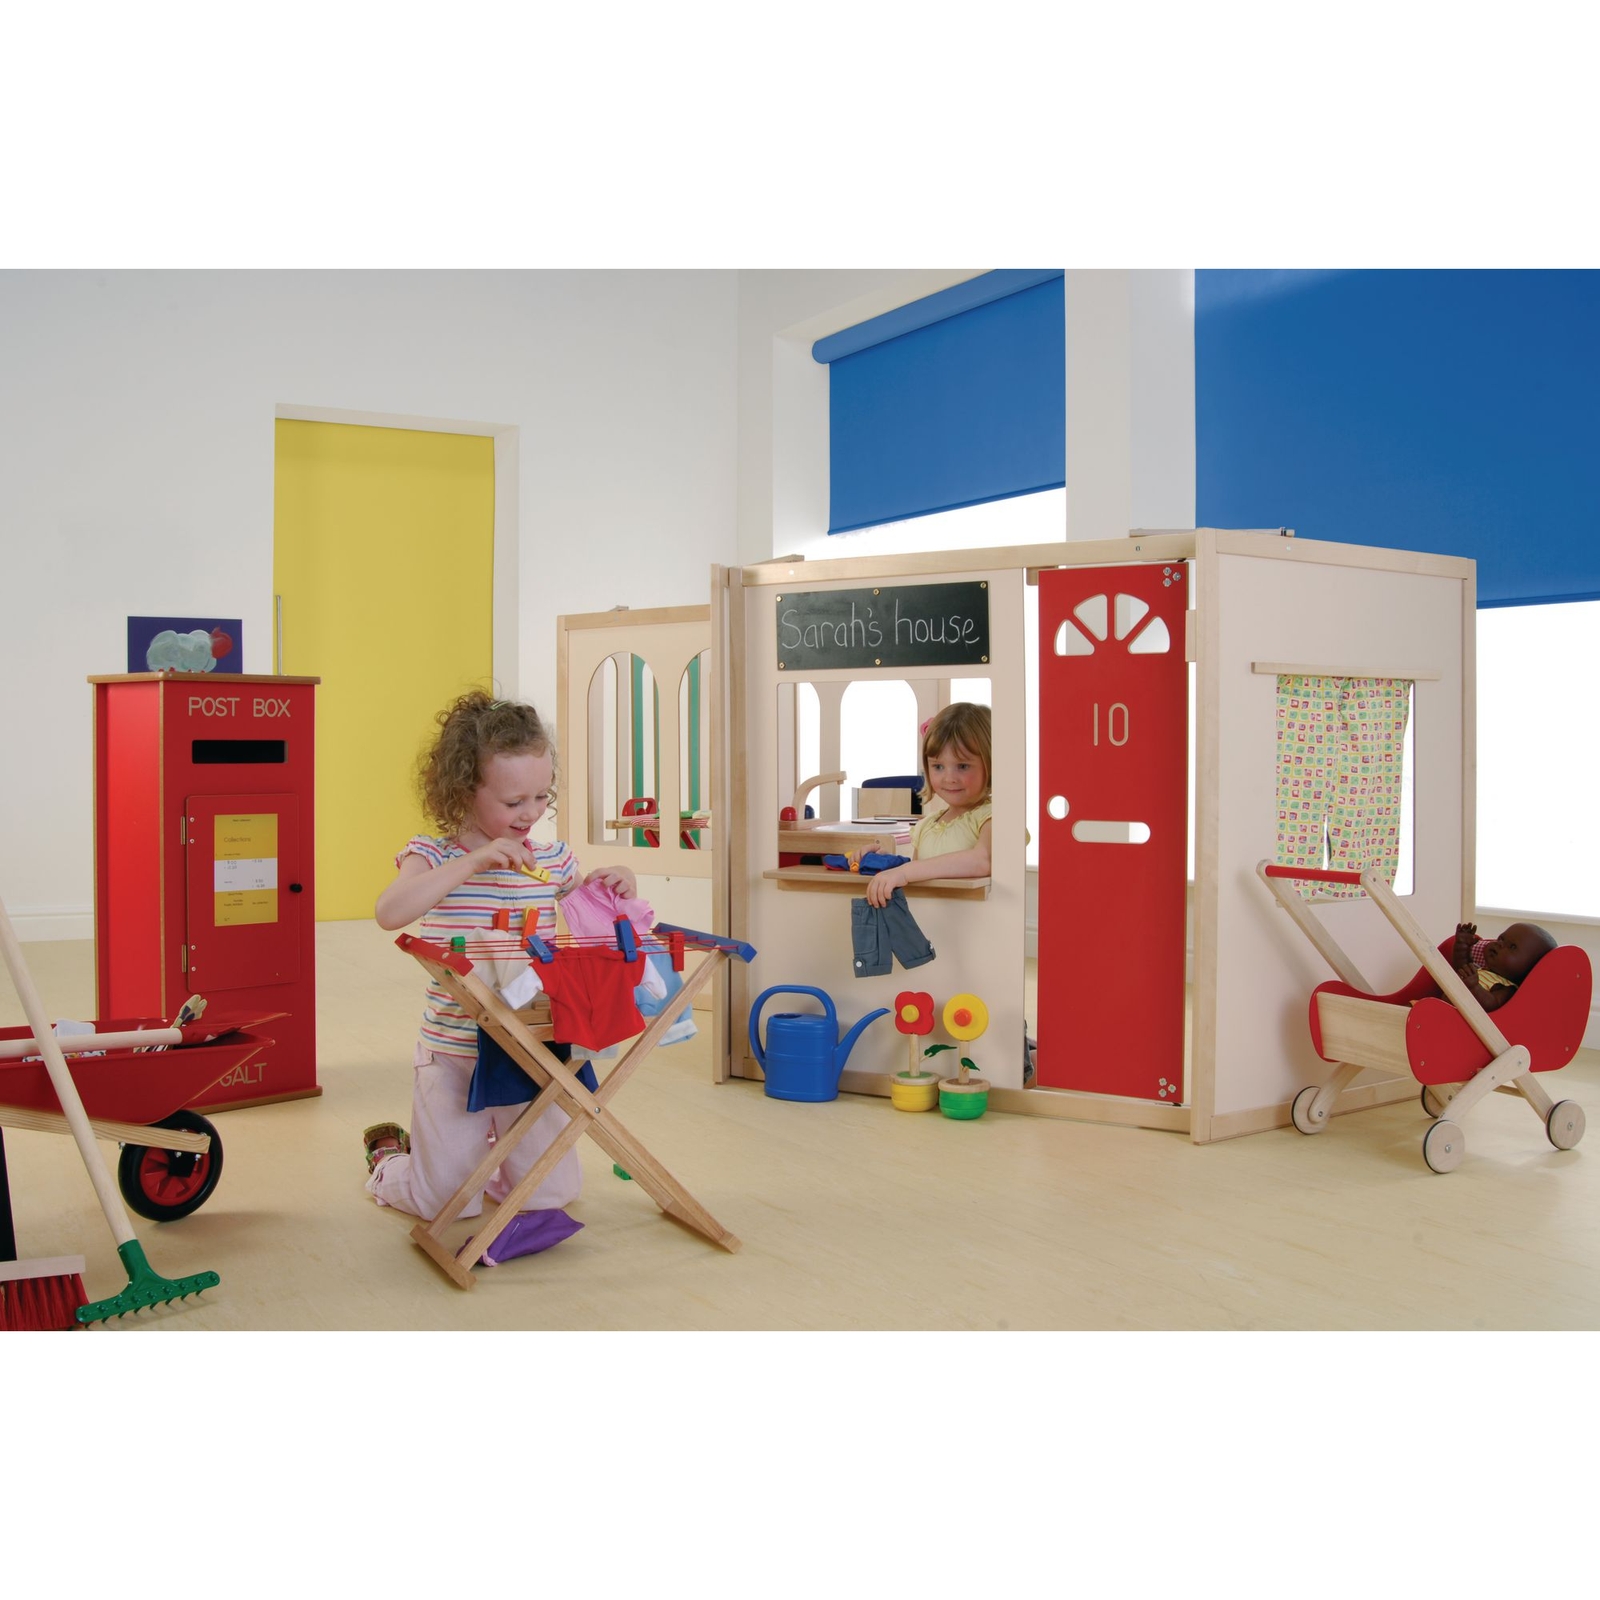 GALT Play House Panels - Front W1070 x H1070mm, Sides H1070 x W860mm - Pack of 3 Sides